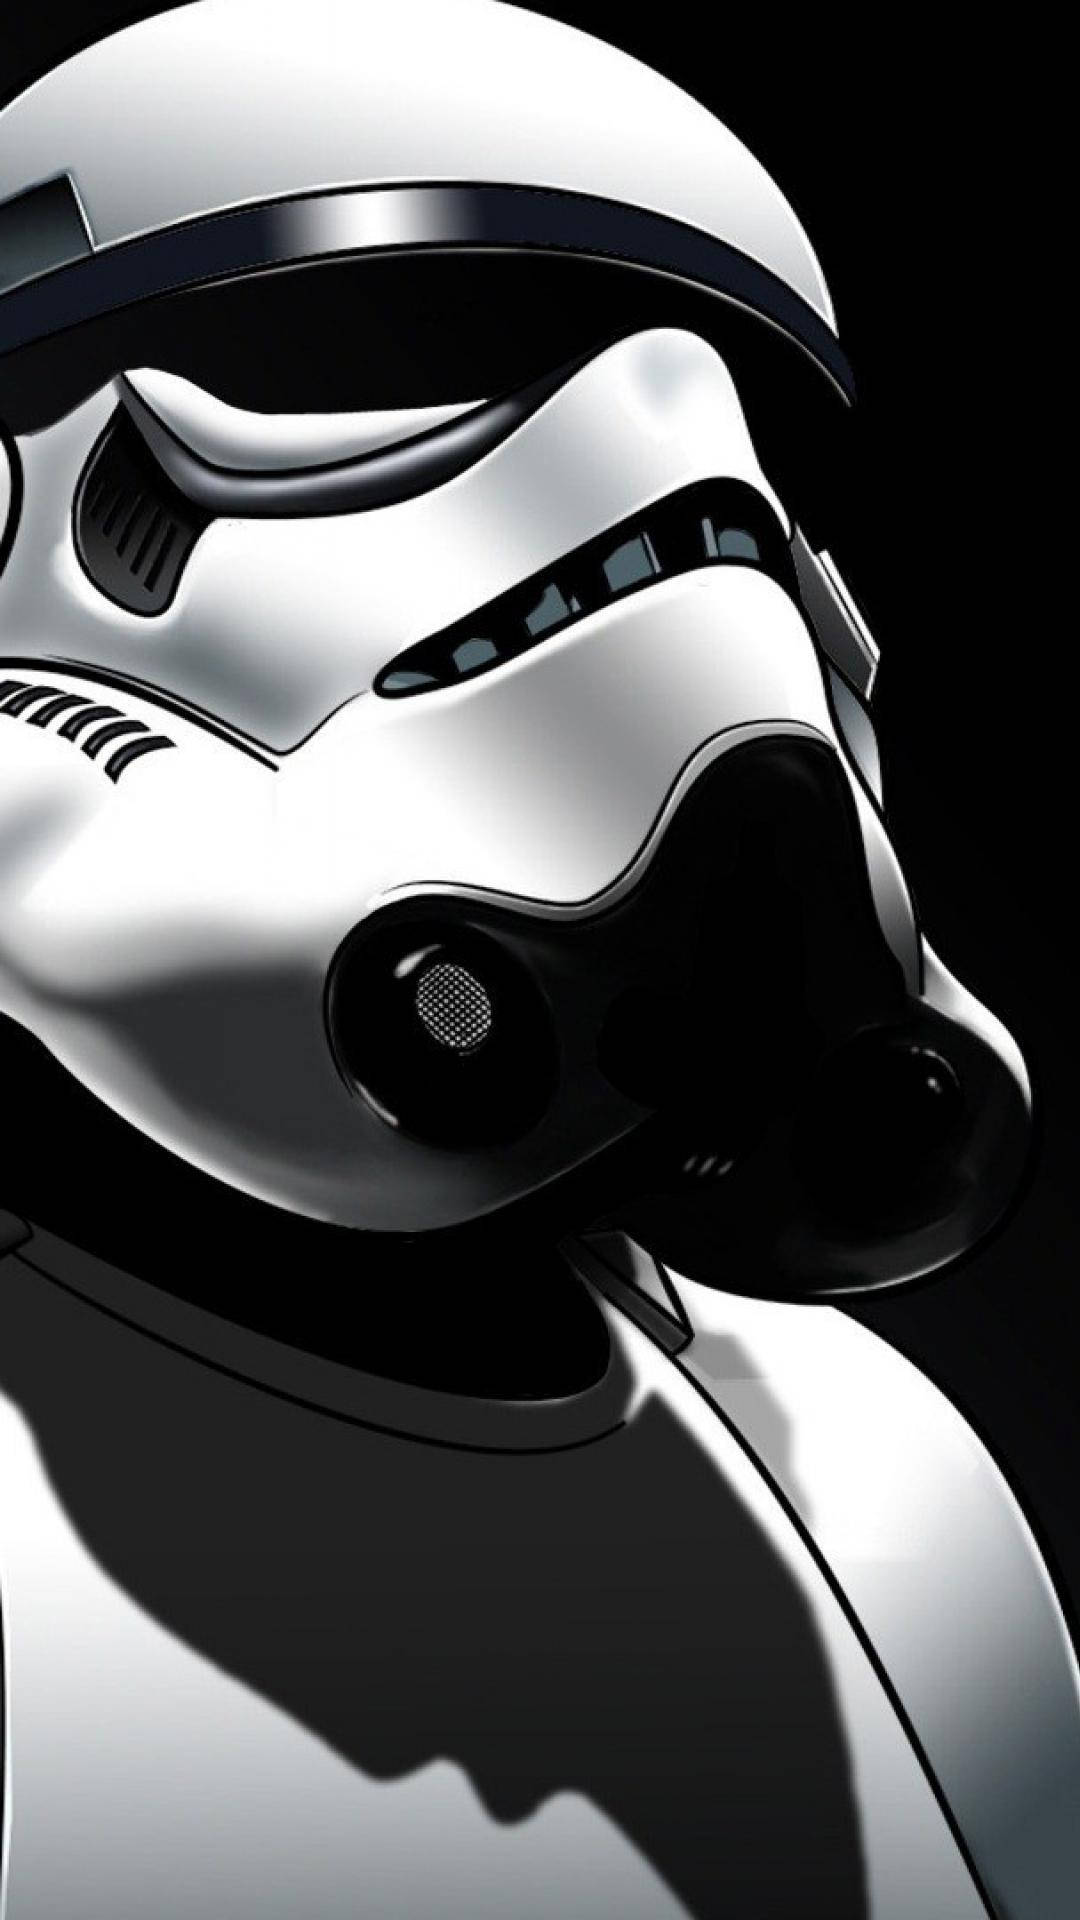 Close-up Star Wars Iphone 6 Plus Background